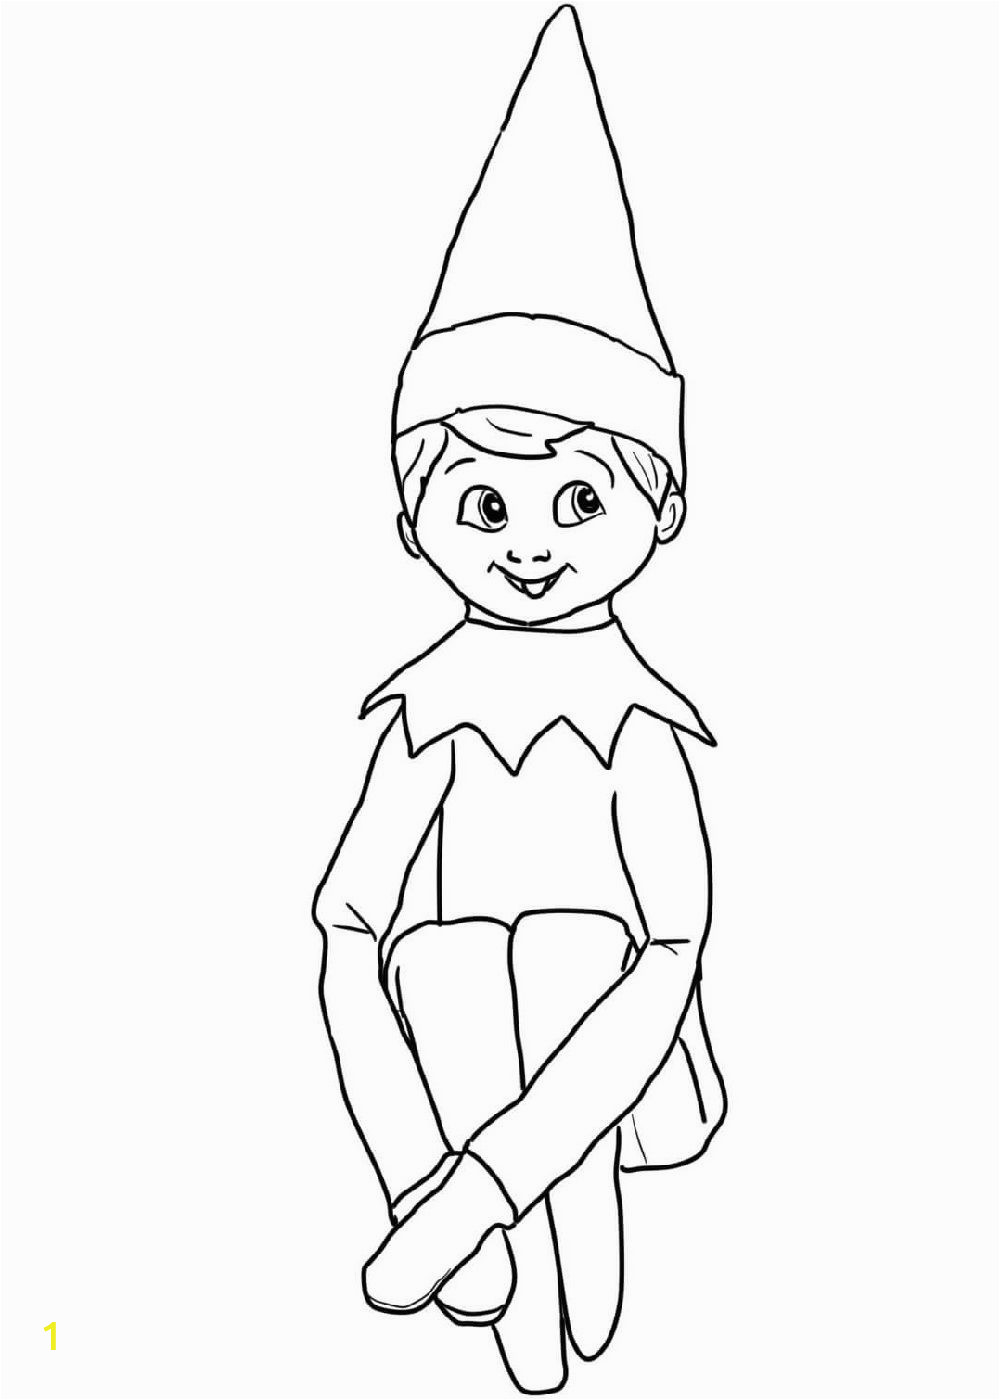 Boy Elf On the Shelf Coloring Pages Baby Elf the Shelf Coloring Pages Design Collection